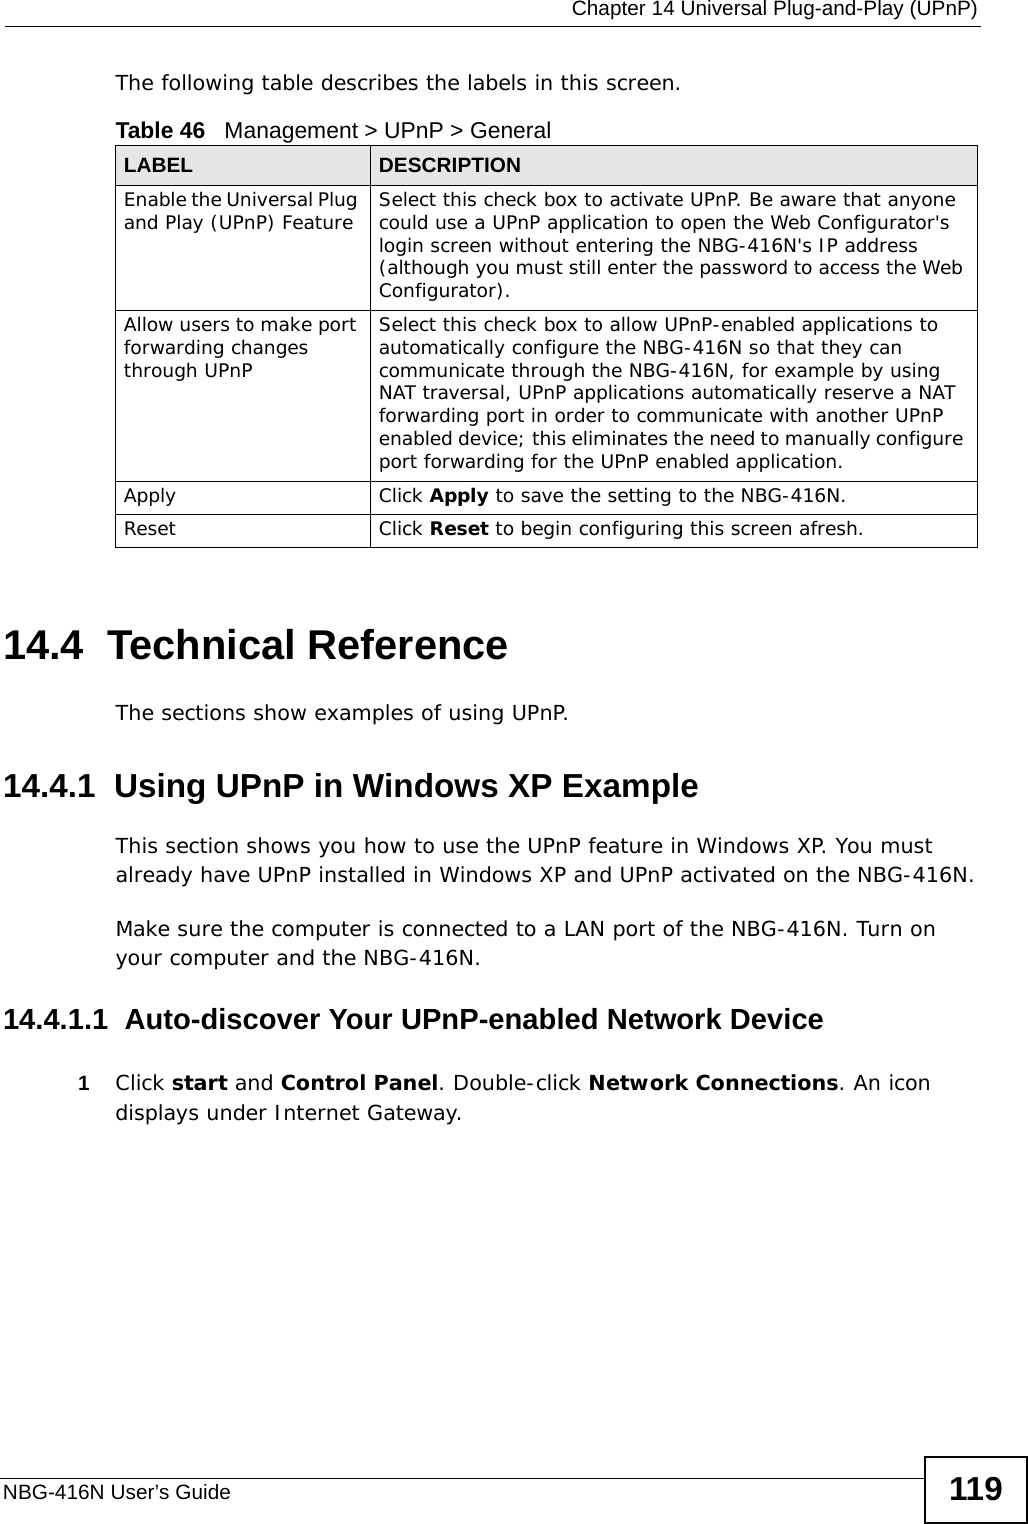  Chapter 14 Universal Plug-and-Play (UPnP)NBG-416N User’s Guide 119The following table describes the labels in this screen. 14.4  Technical ReferenceThe sections show examples of using UPnP. 14.4.1  Using UPnP in Windows XP ExampleThis section shows you how to use the UPnP feature in Windows XP. You must already have UPnP installed in Windows XP and UPnP activated on the NBG-416N.Make sure the computer is connected to a LAN port of the NBG-416N. Turn on your computer and the NBG-416N. 14.4.1.1  Auto-discover Your UPnP-enabled Network Device1Click start and Control Panel. Double-click Network Connections. An icon displays under Internet Gateway.Table 46   Management &gt; UPnP &gt; GeneralLABEL DESCRIPTIONEnable the Universal Plug and Play (UPnP) Feature Select this check box to activate UPnP. Be aware that anyone could use a UPnP application to open the Web Configurator&apos;s login screen without entering the NBG-416N&apos;s IP address (although you must still enter the password to access the Web Configurator).Allow users to make port forwarding changes through UPnPSelect this check box to allow UPnP-enabled applications to automatically configure the NBG-416N so that they can communicate through the NBG-416N, for example by using NAT traversal, UPnP applications automatically reserve a NAT forwarding port in order to communicate with another UPnP enabled device; this eliminates the need to manually configure port forwarding for the UPnP enabled application. Apply Click Apply to save the setting to the NBG-416N.Reset Click Reset to begin configuring this screen afresh.